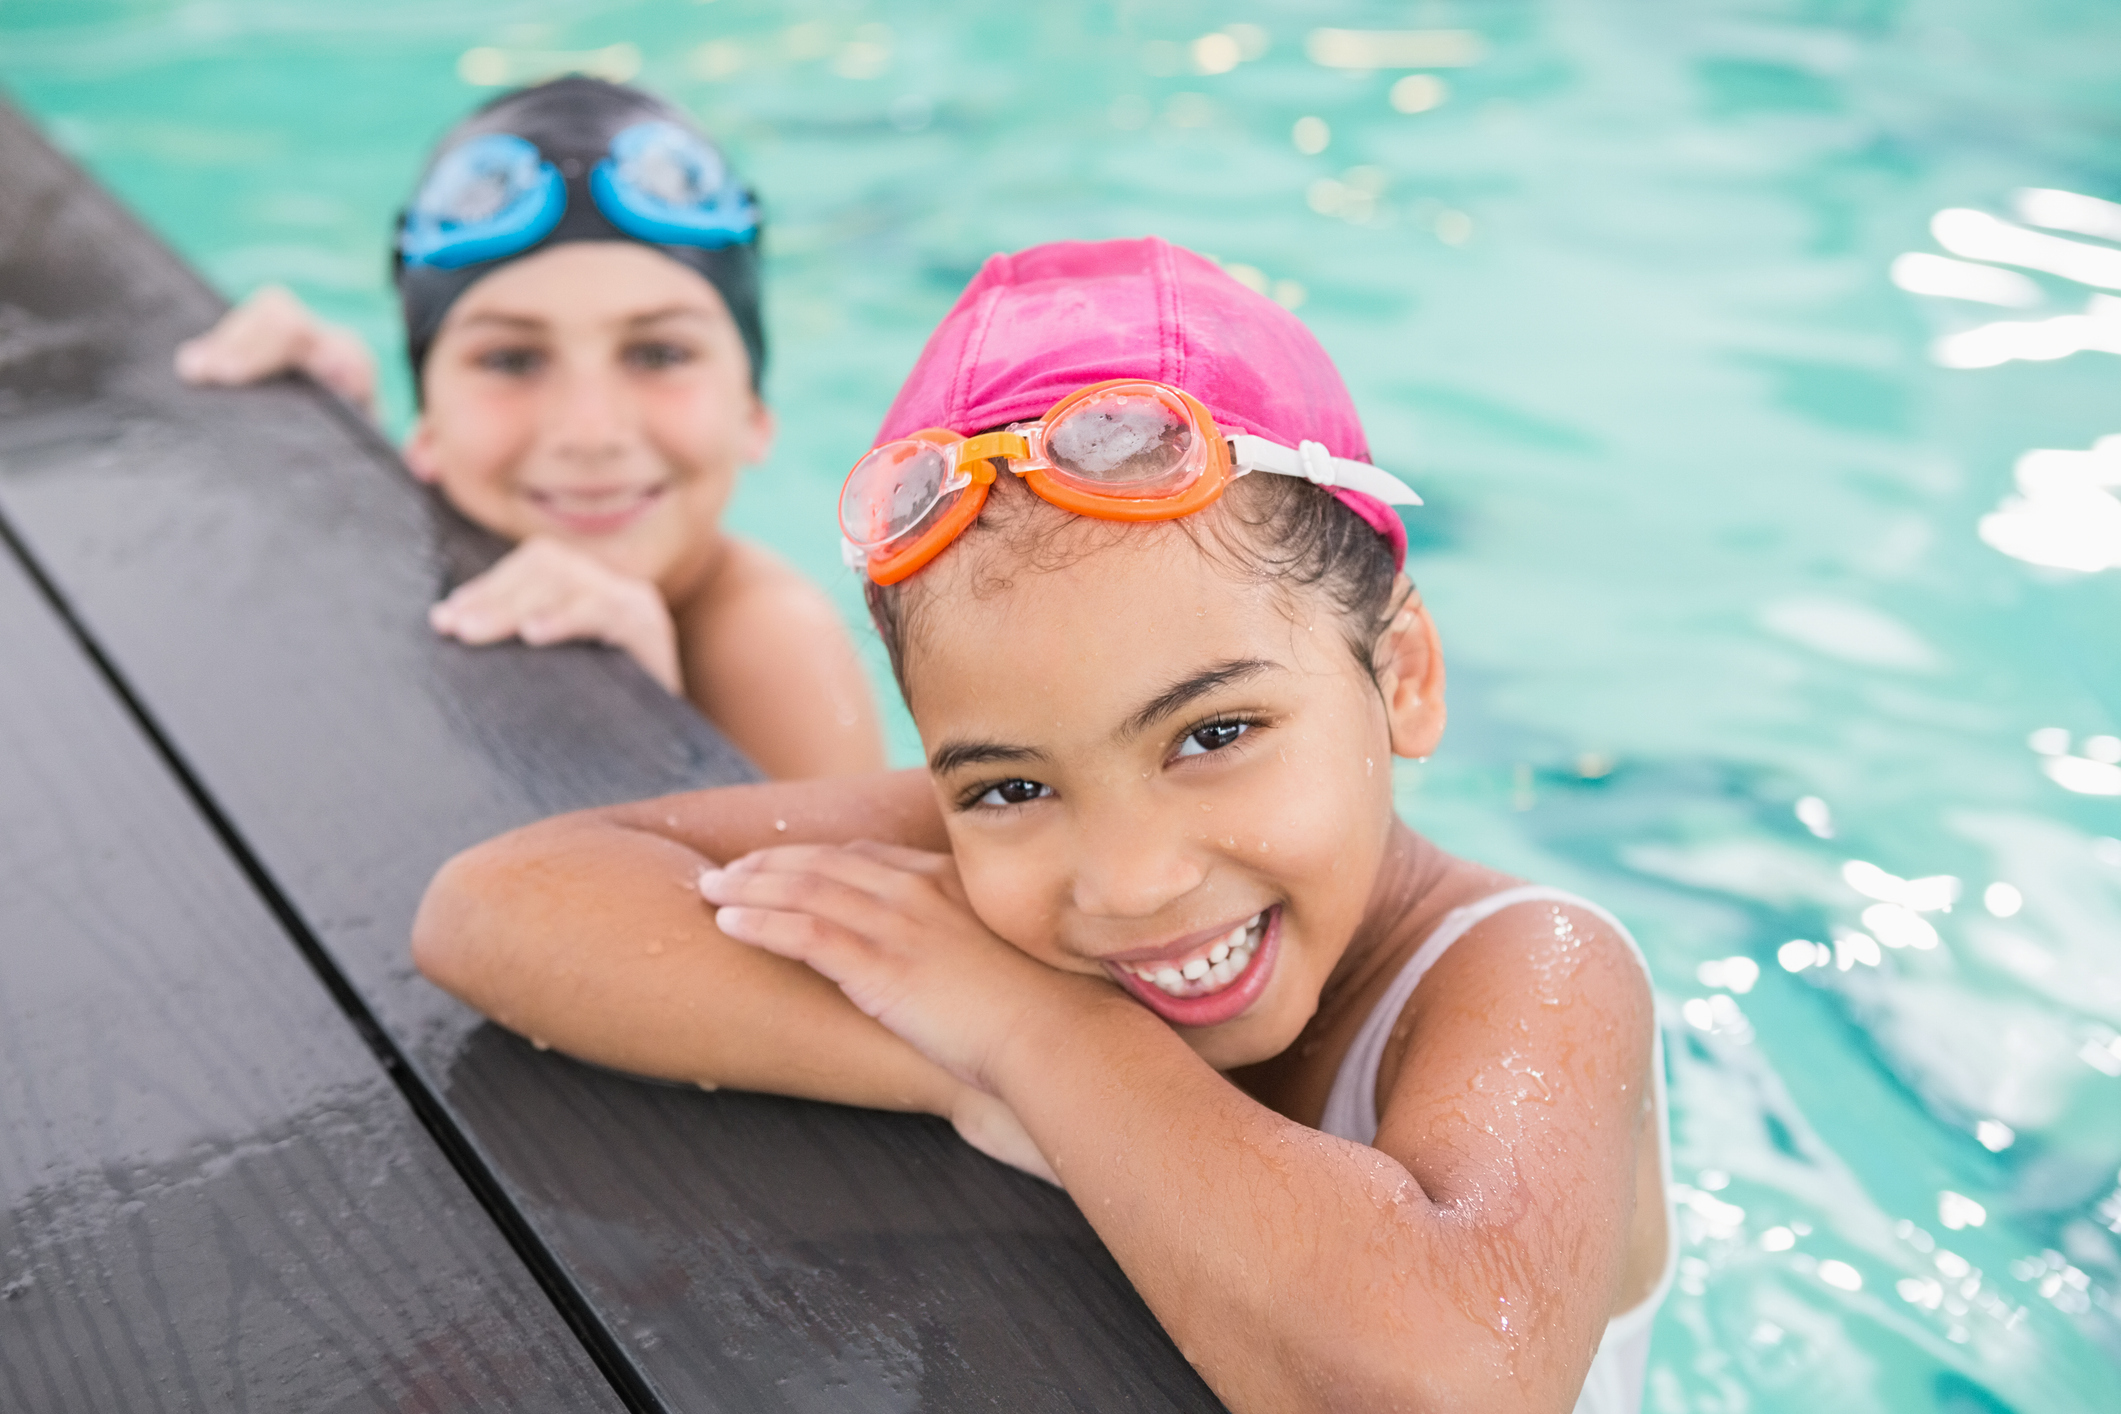 Two young girls smile at the side of a swimming pool